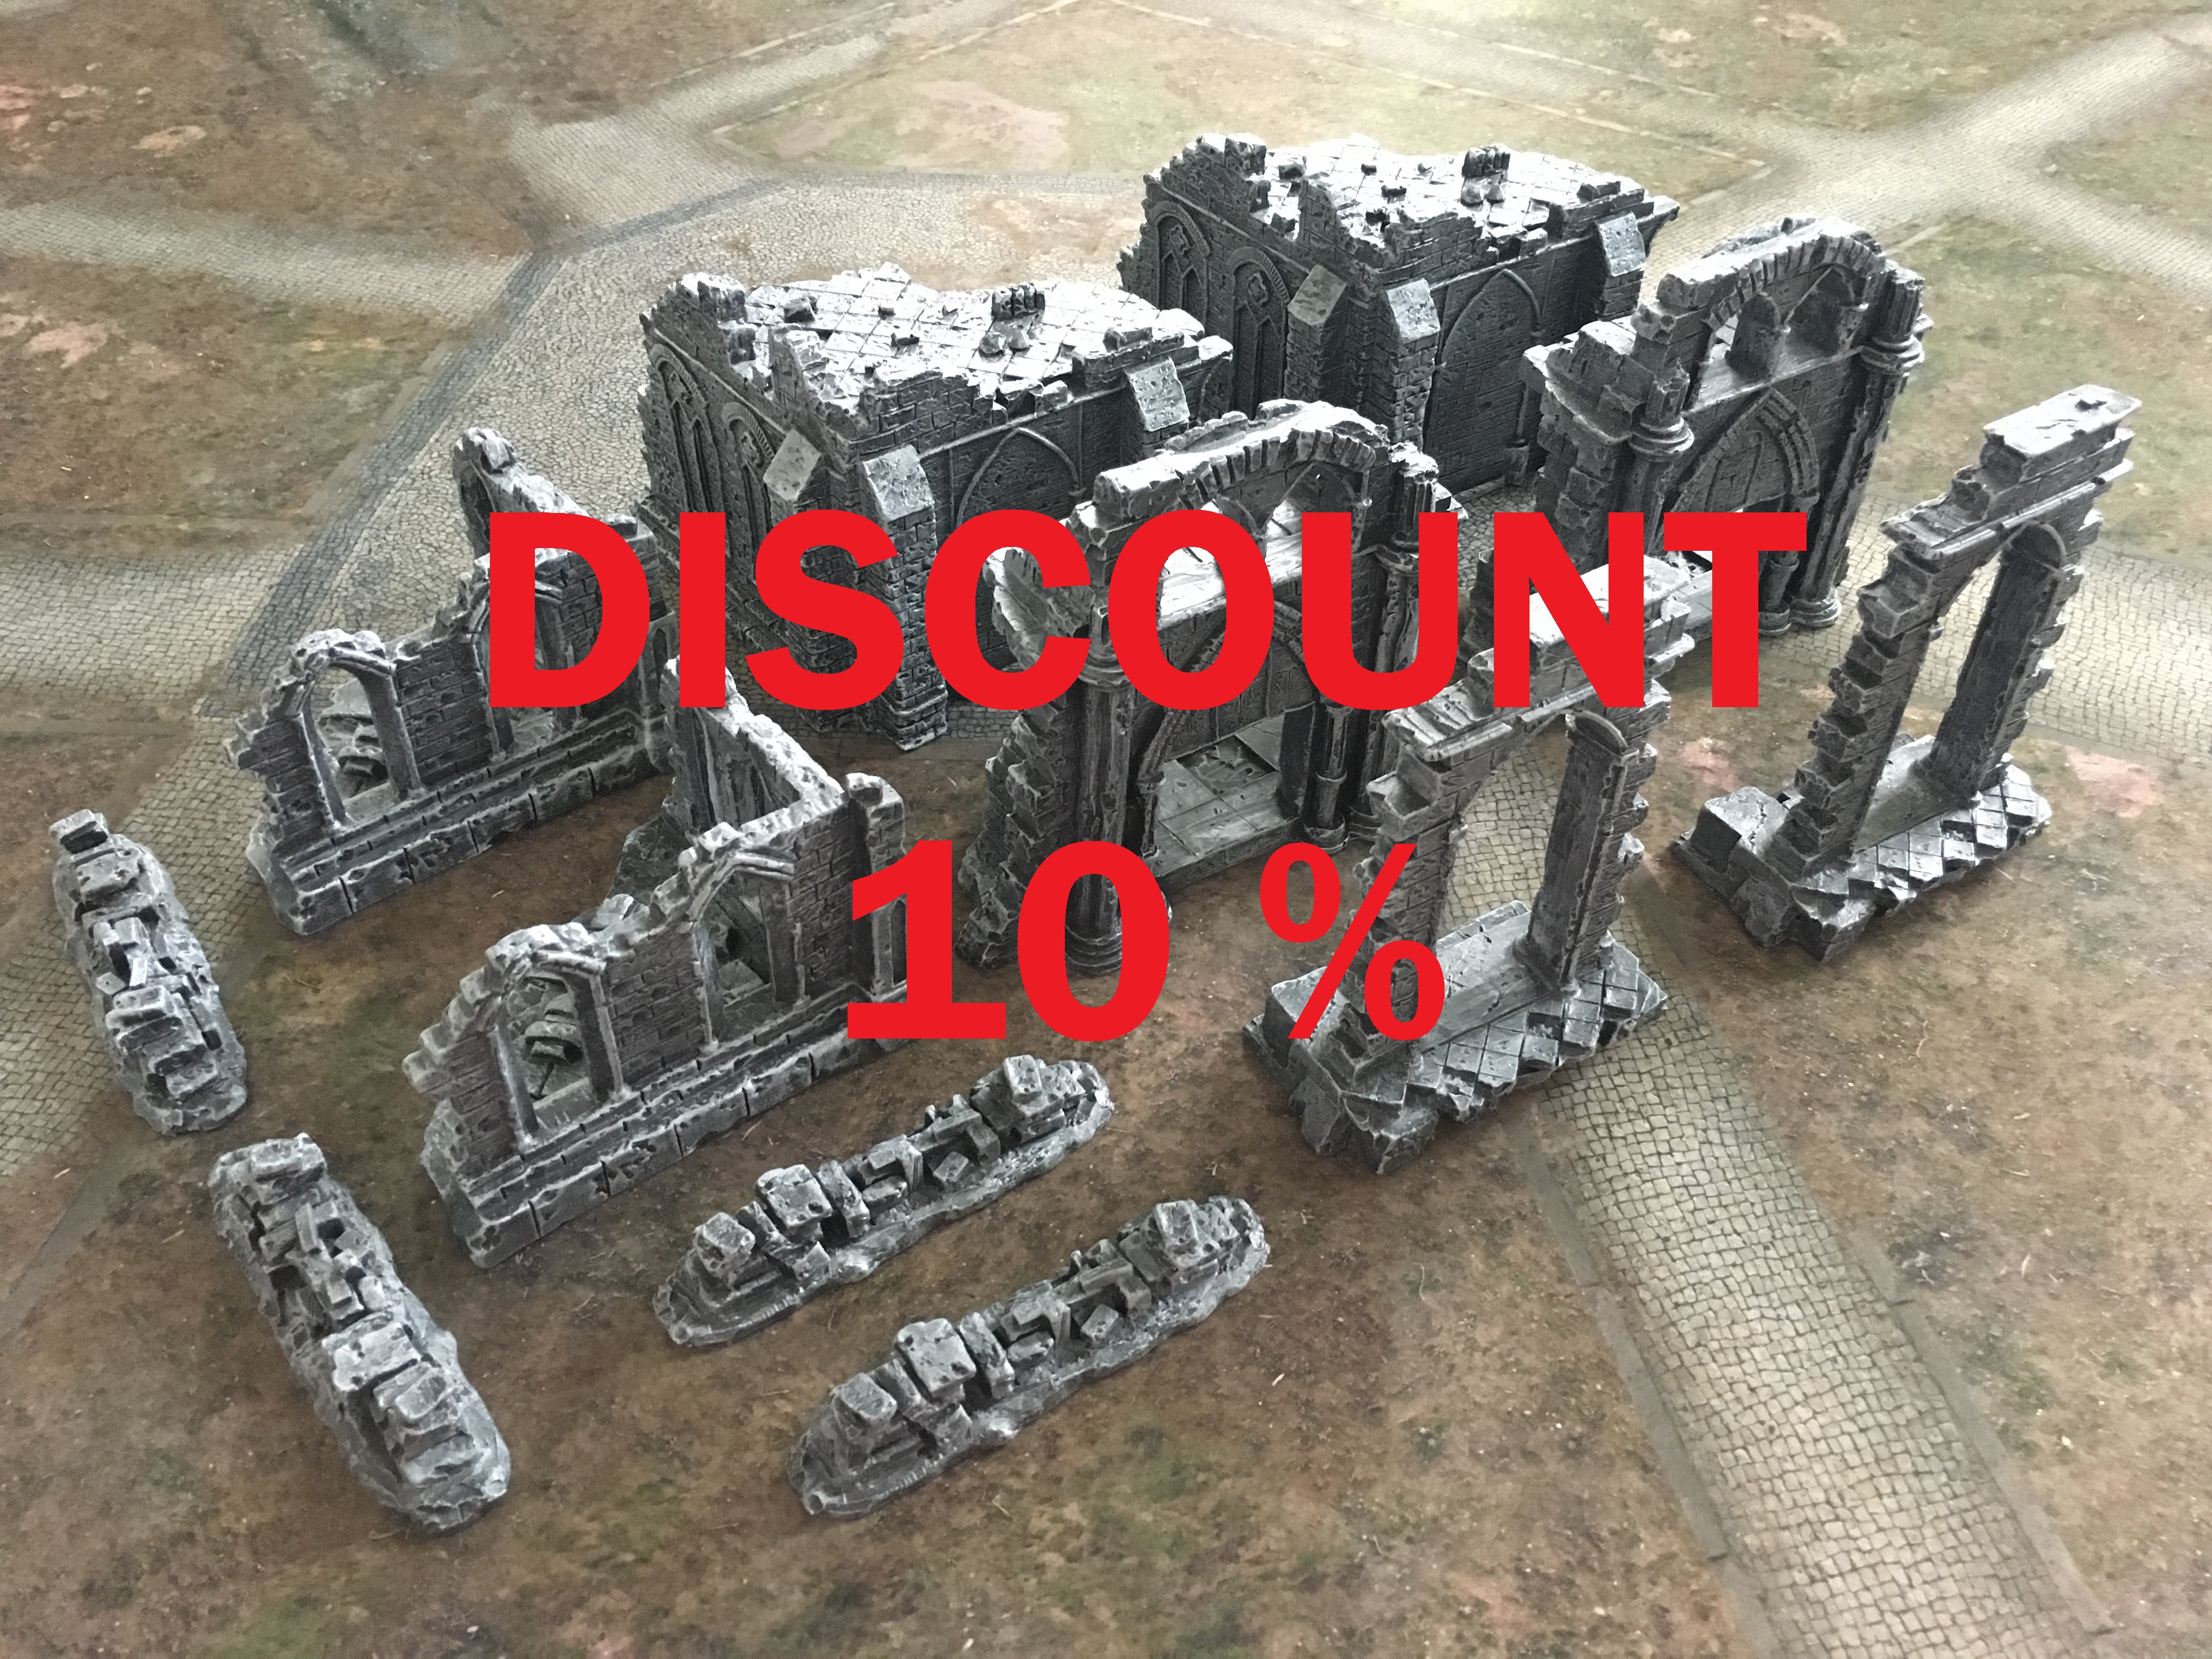 10 % DISCOUNT on 12pcs Gates of the Realms prepainted terrain set